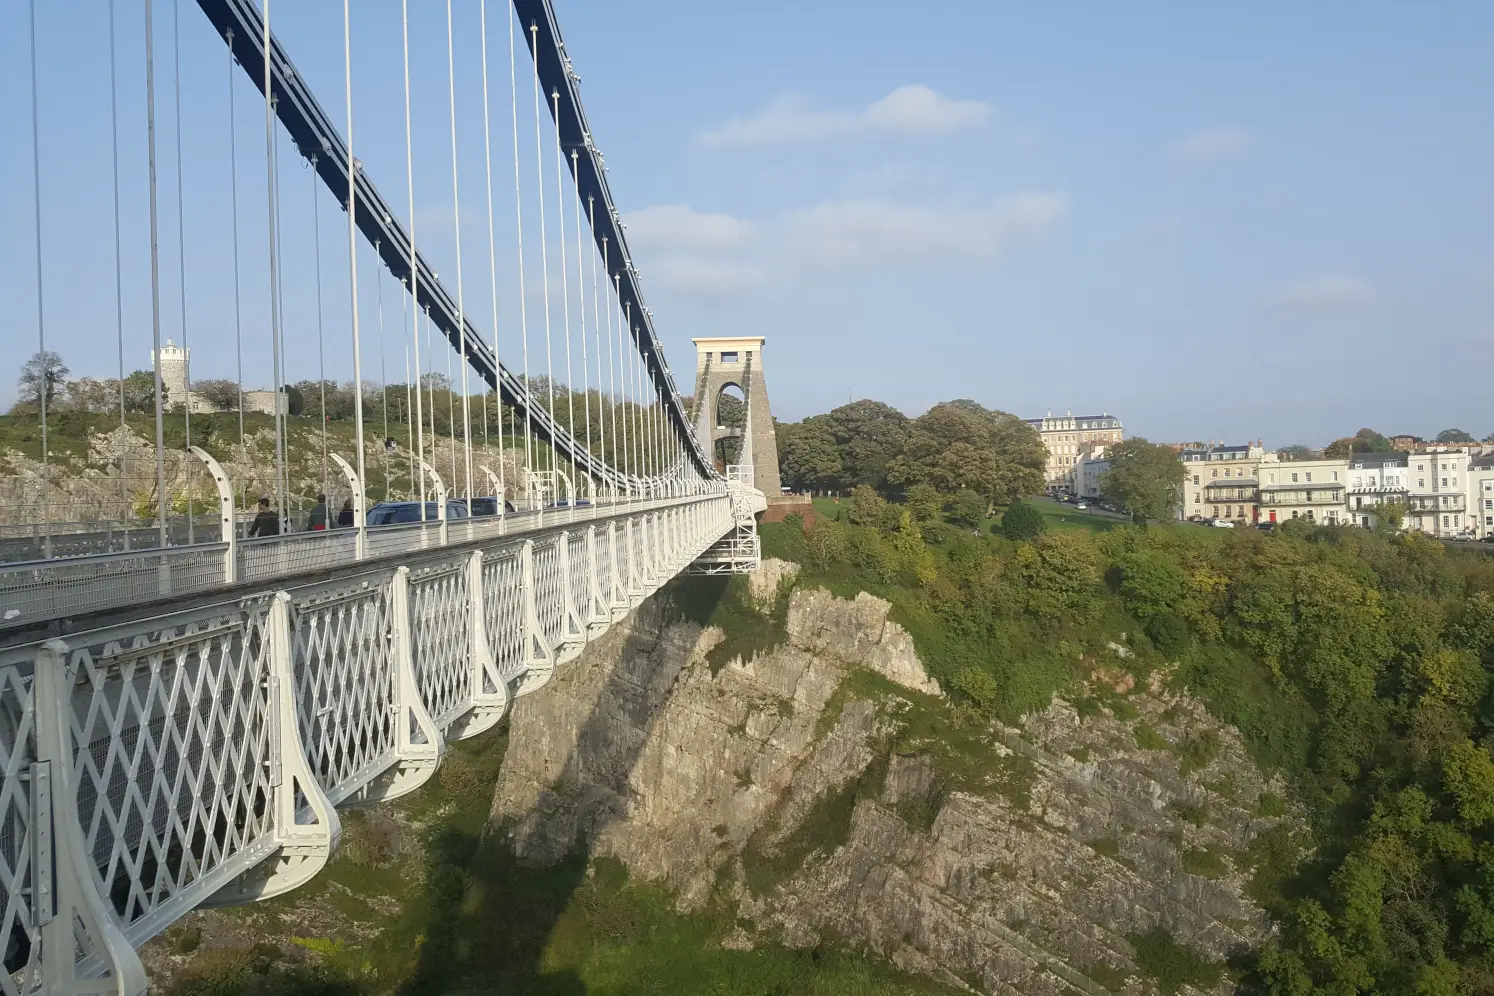 Clifton Suspension Bridge, terraced houses of Clifton Village and the cliffs of Avon Gorge